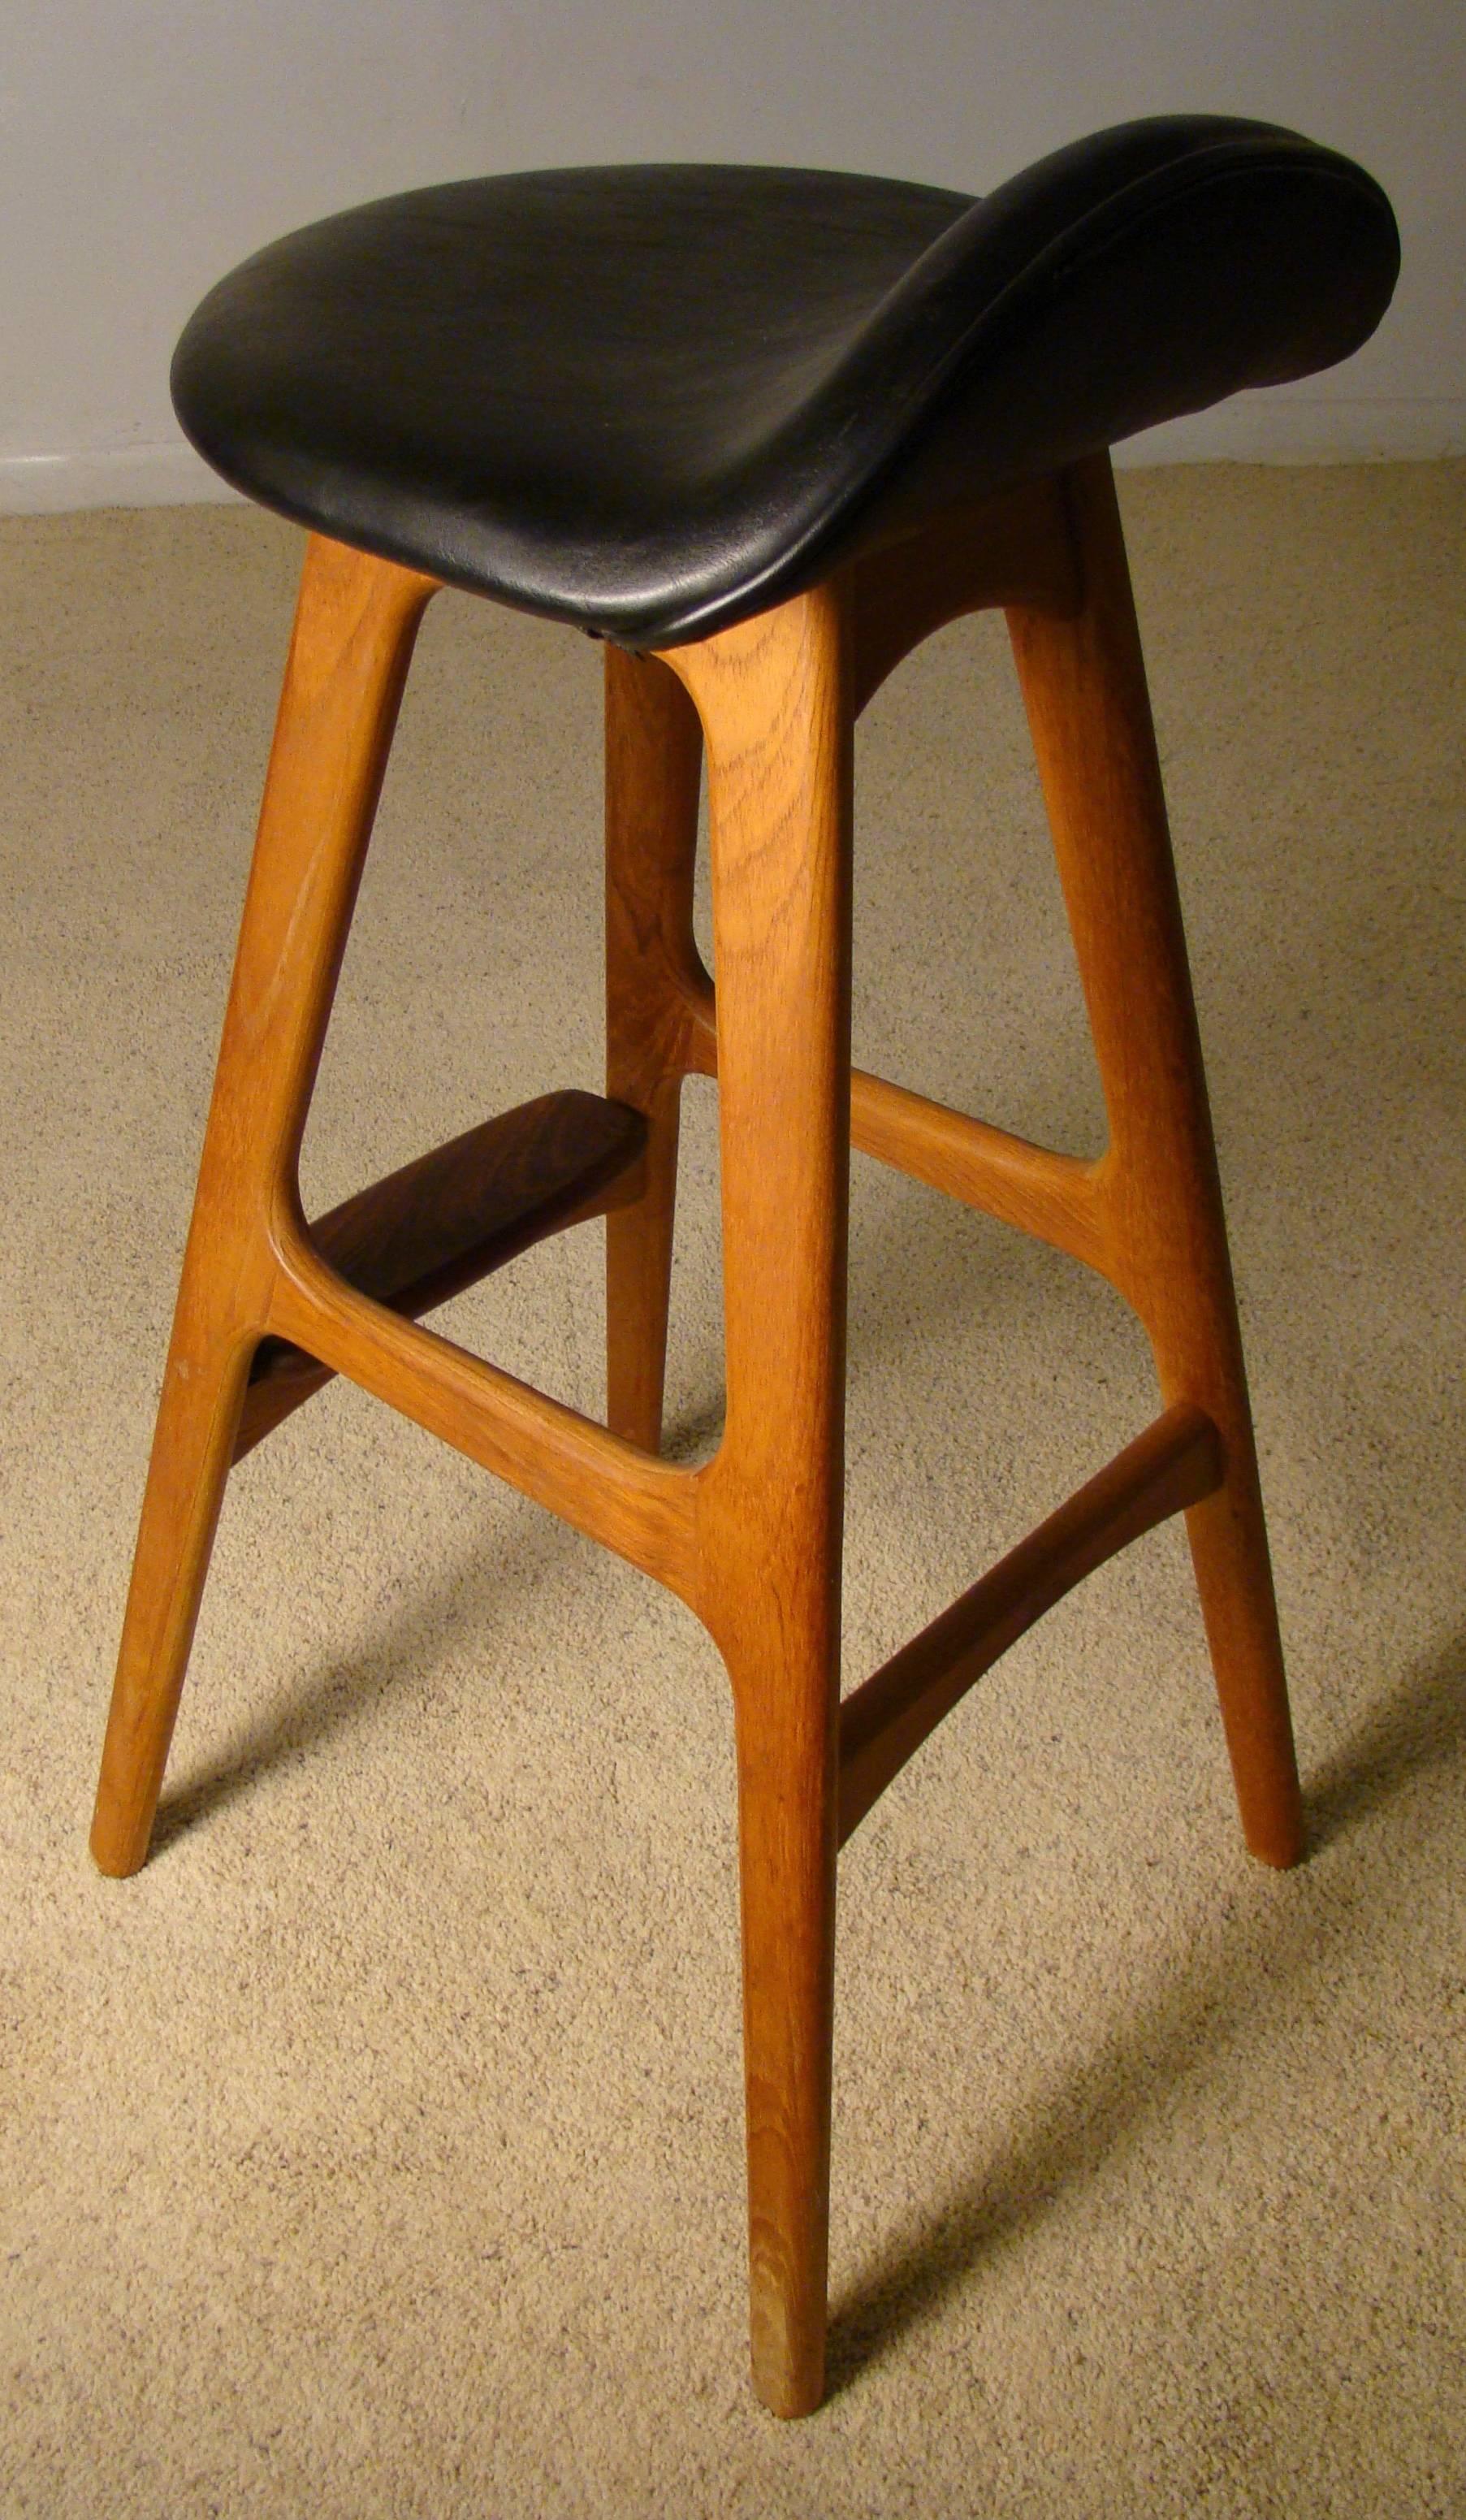 Mid-Century Modern Pair of Teak and Rosewood Danish Modern Bar Stools by Erik Buch for OD Mobler